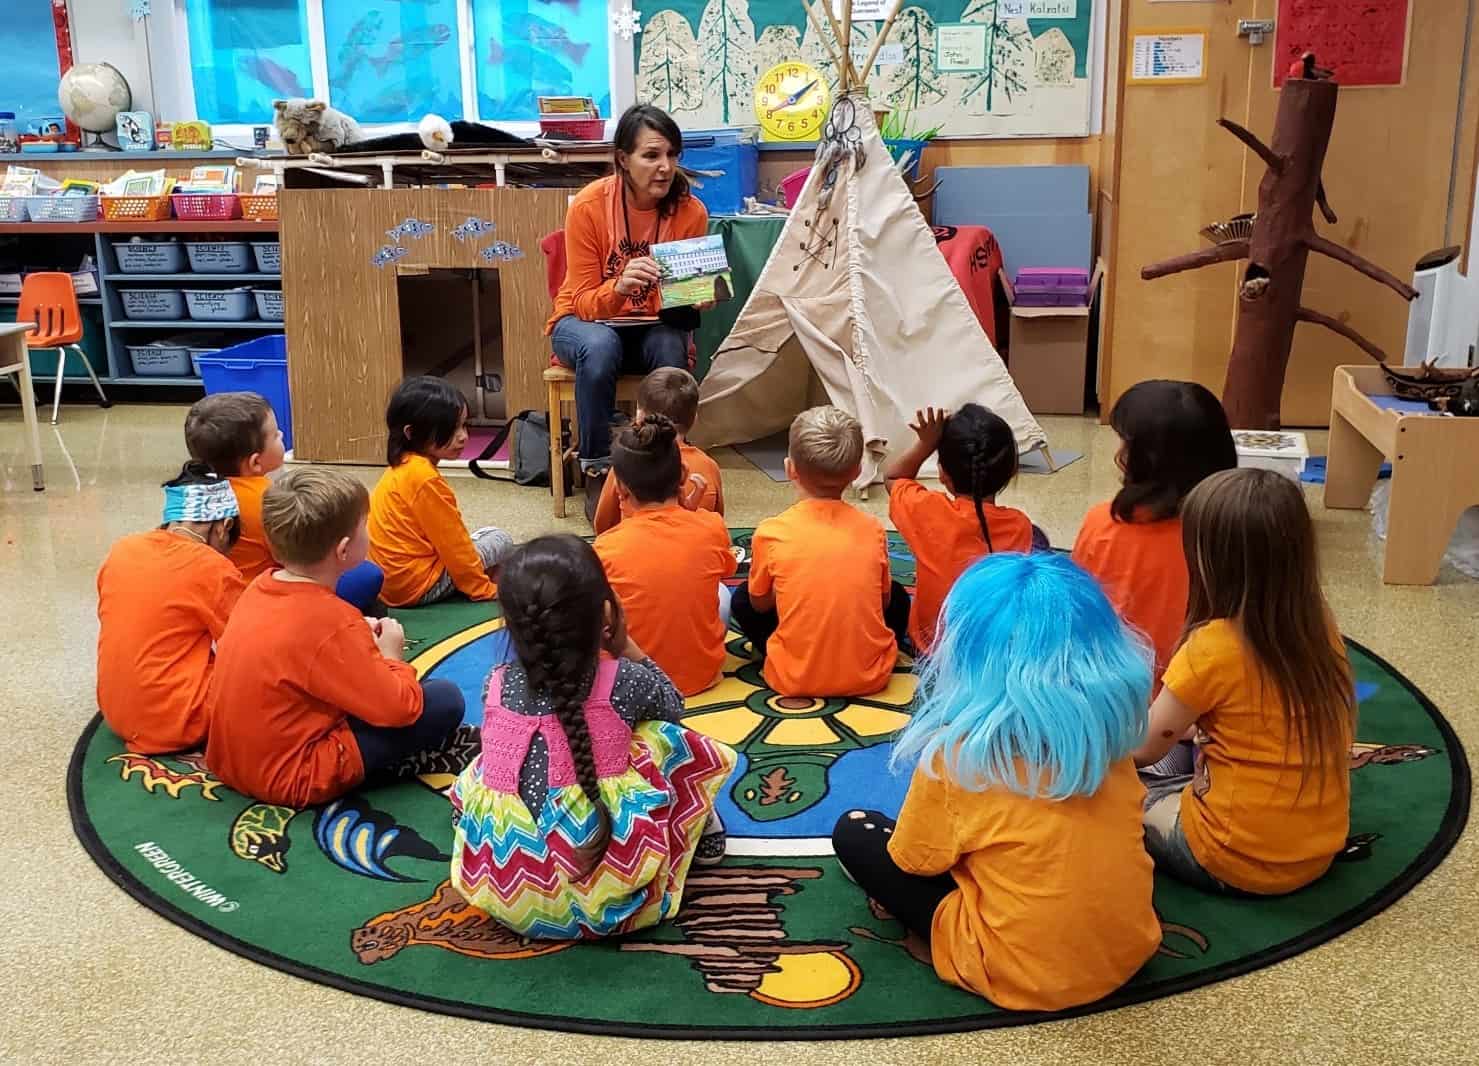 personal teaching statement on indigenous education